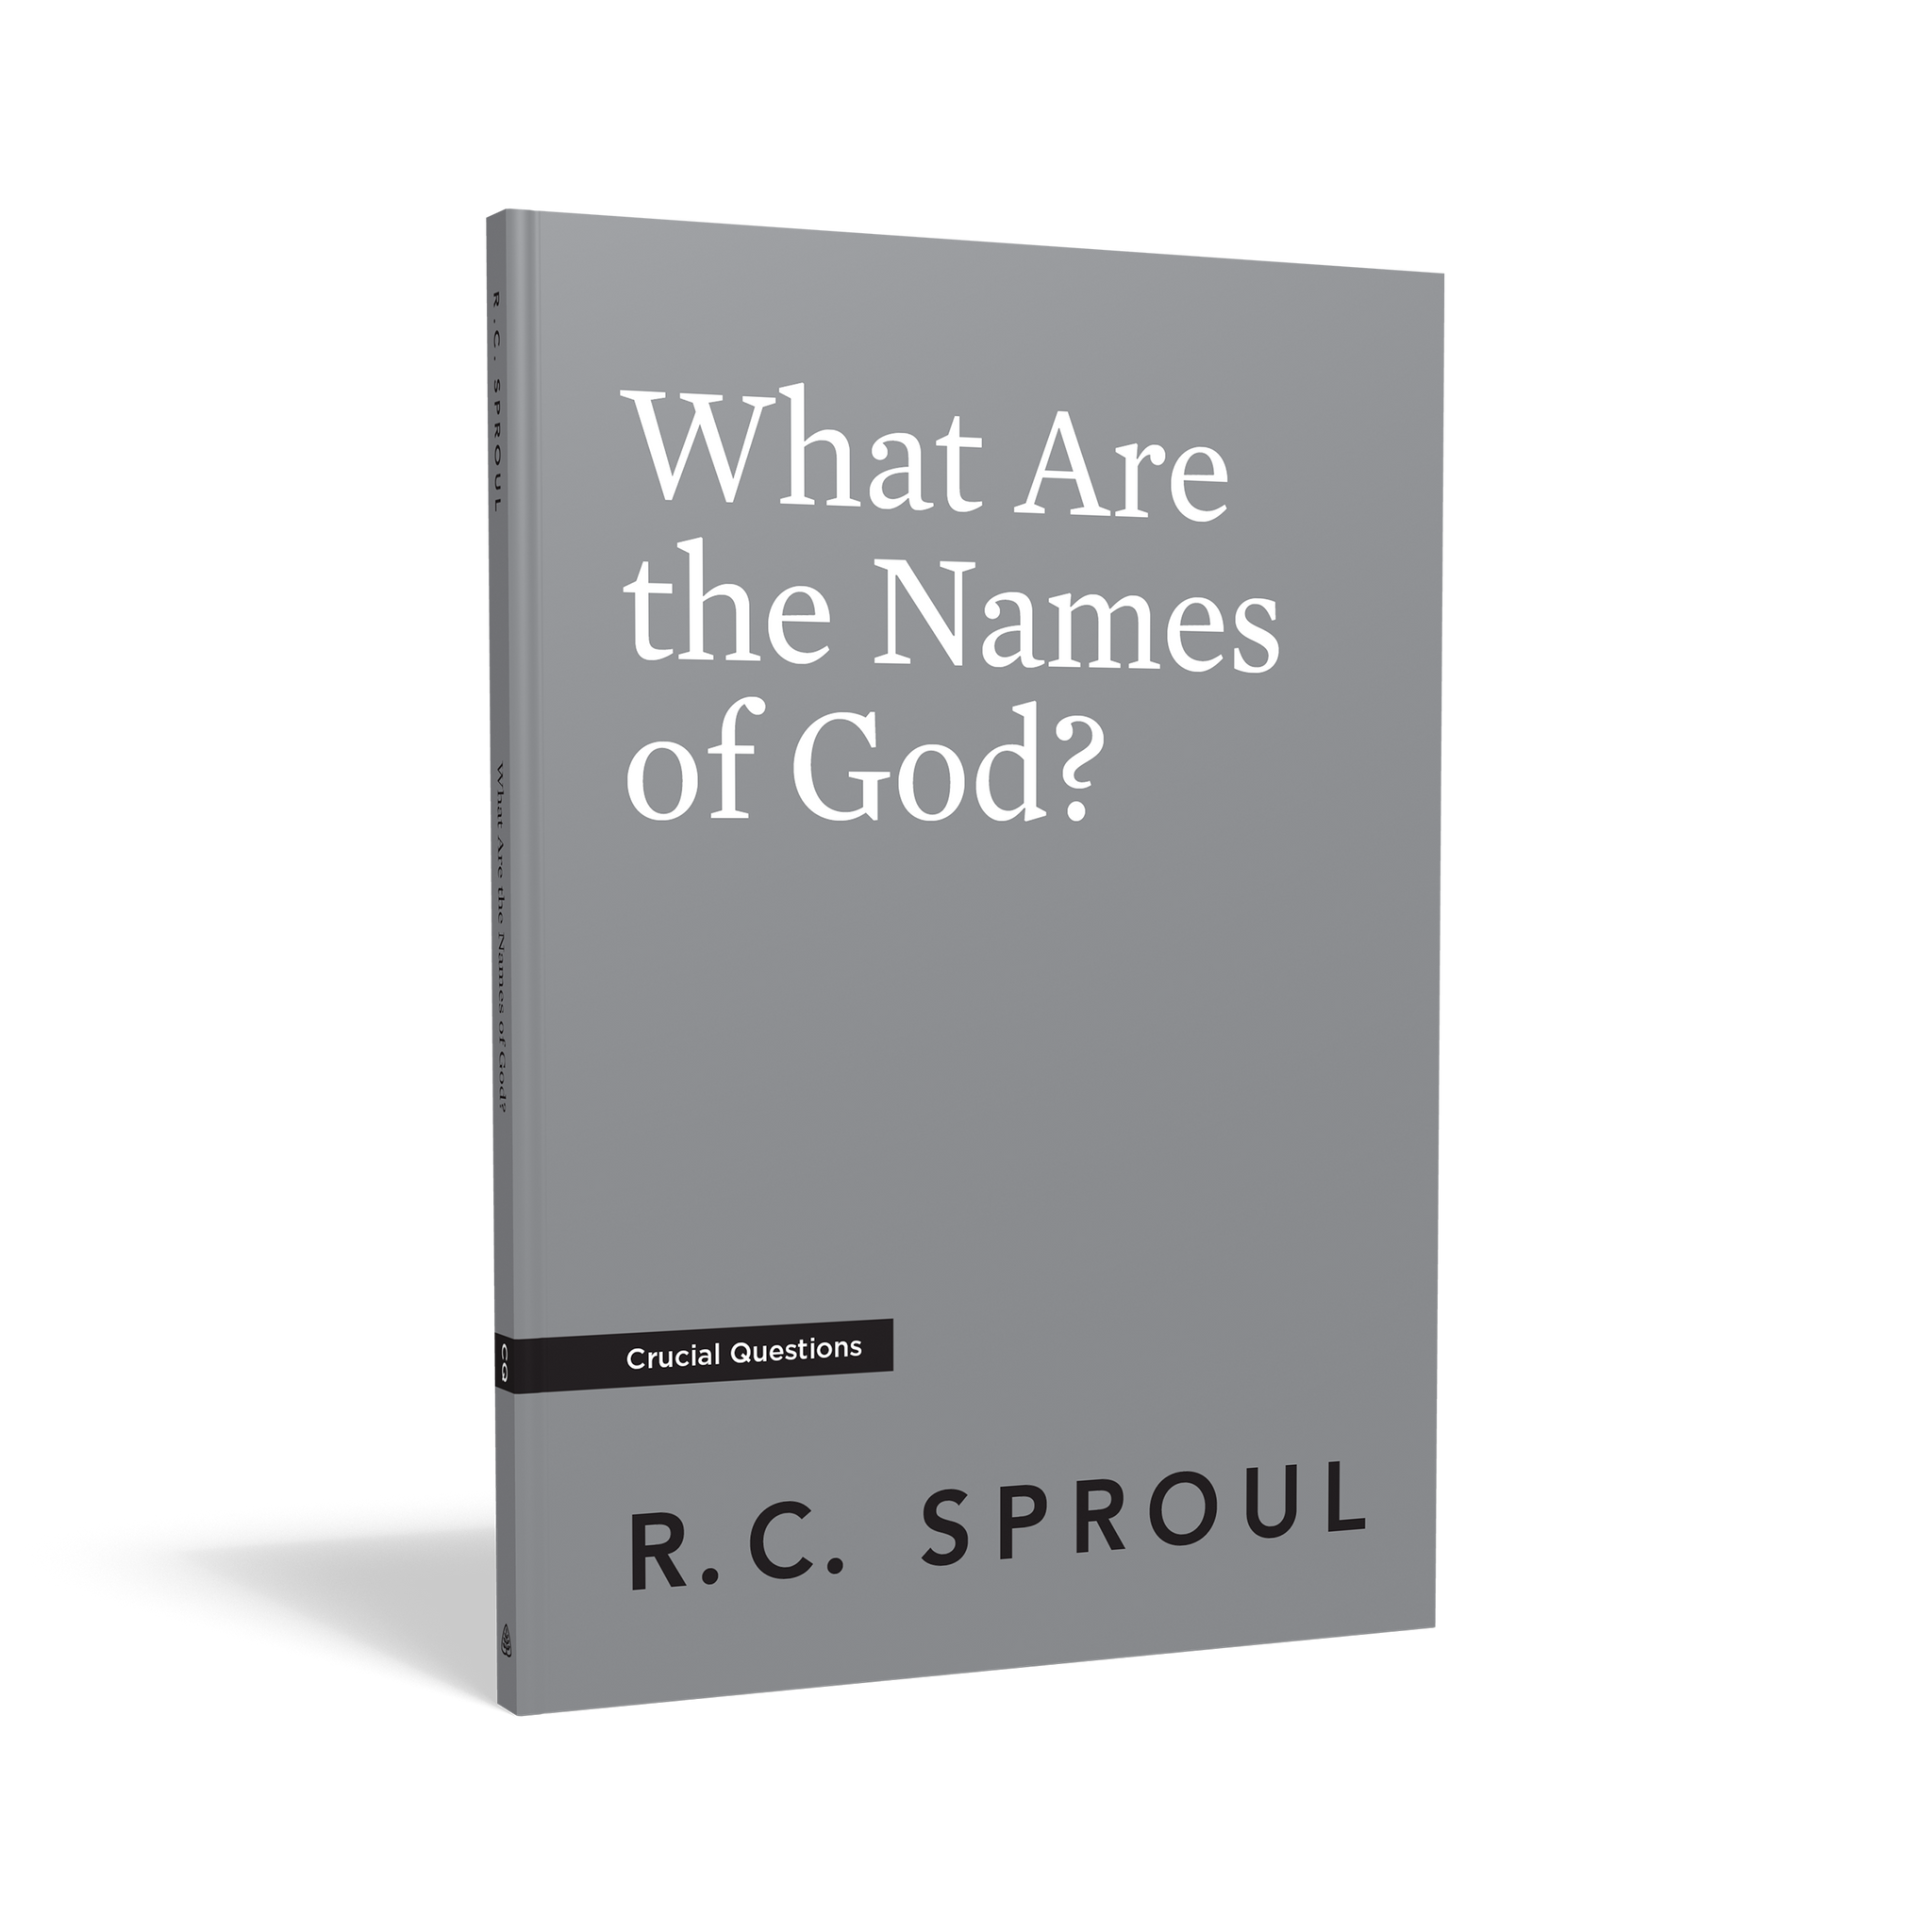 Crucial Questions - What are the Names of God?